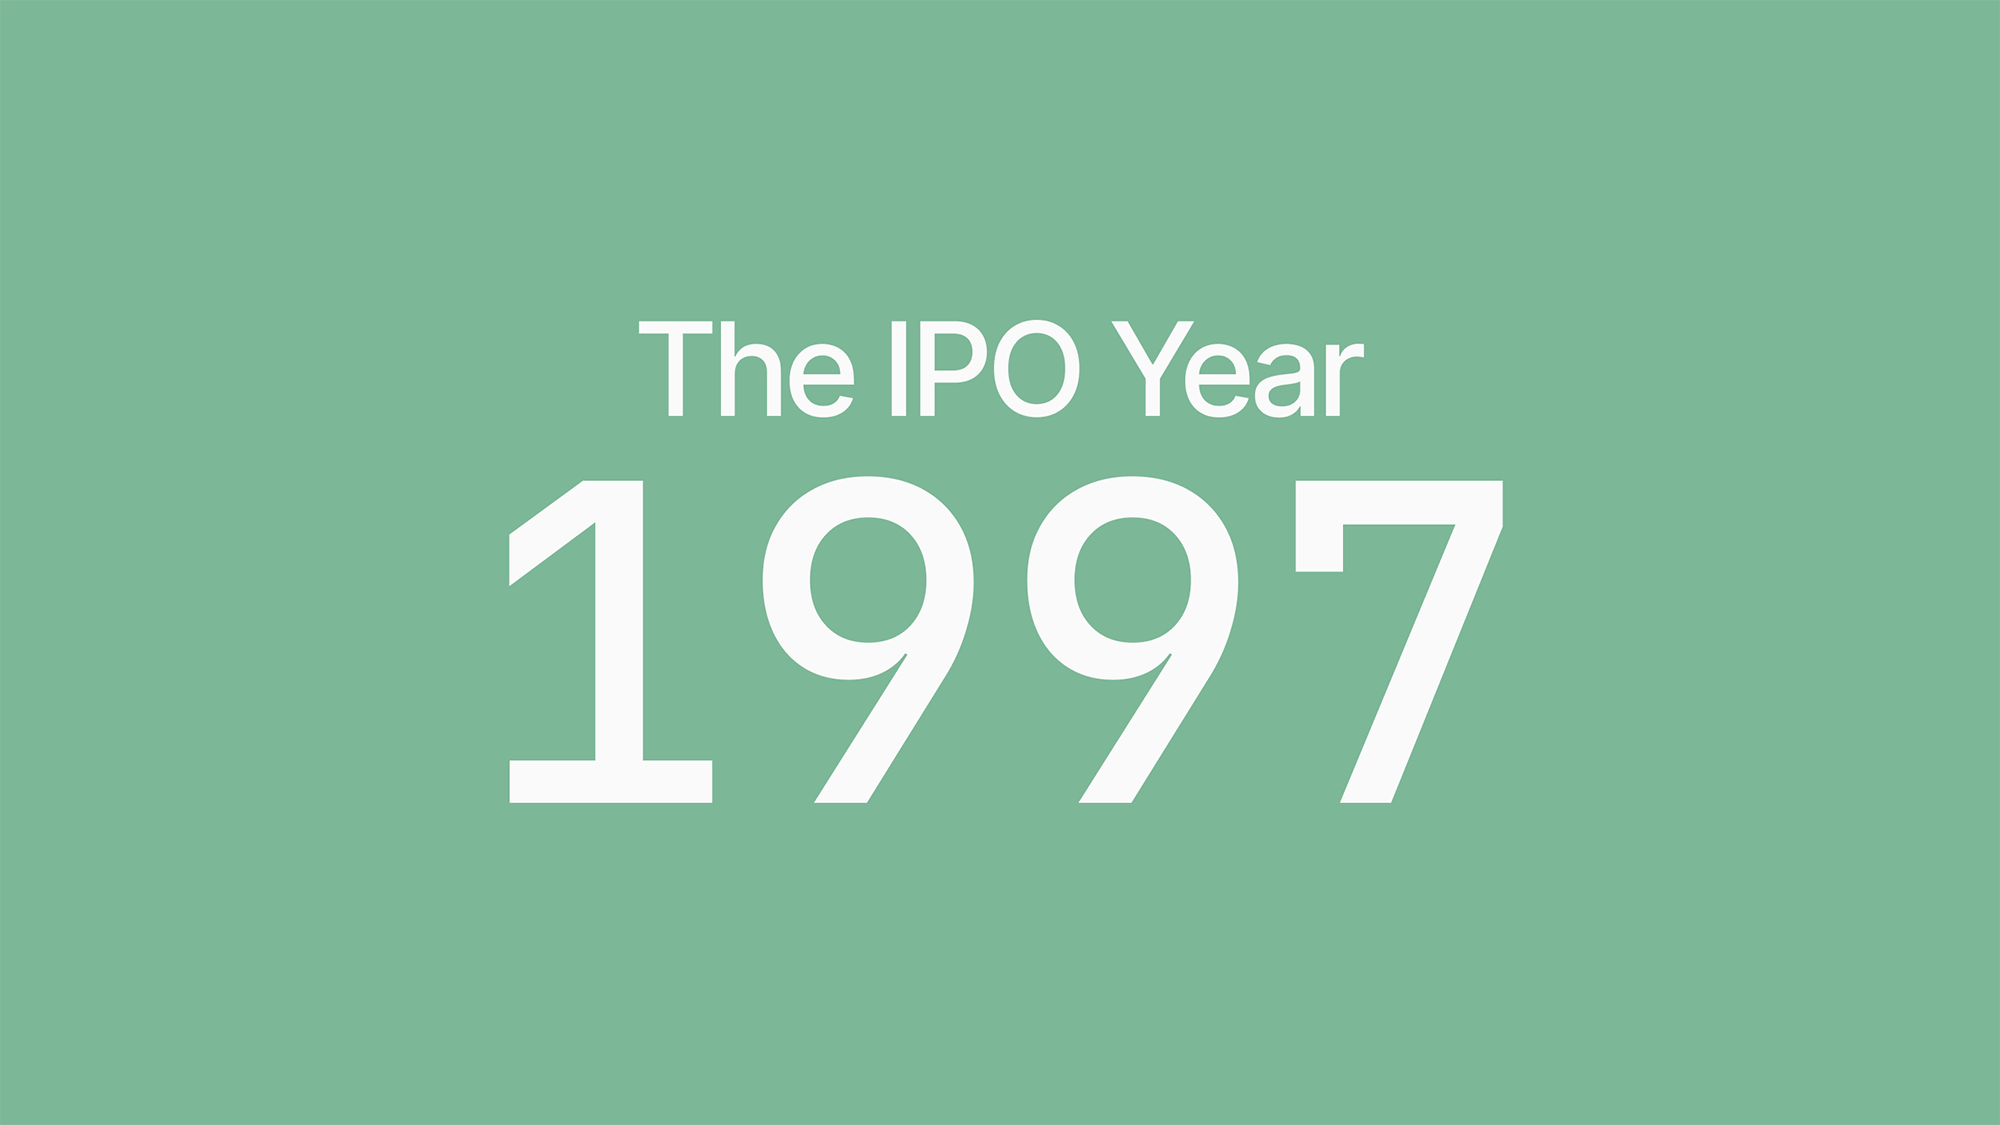 The IPO Year 1997